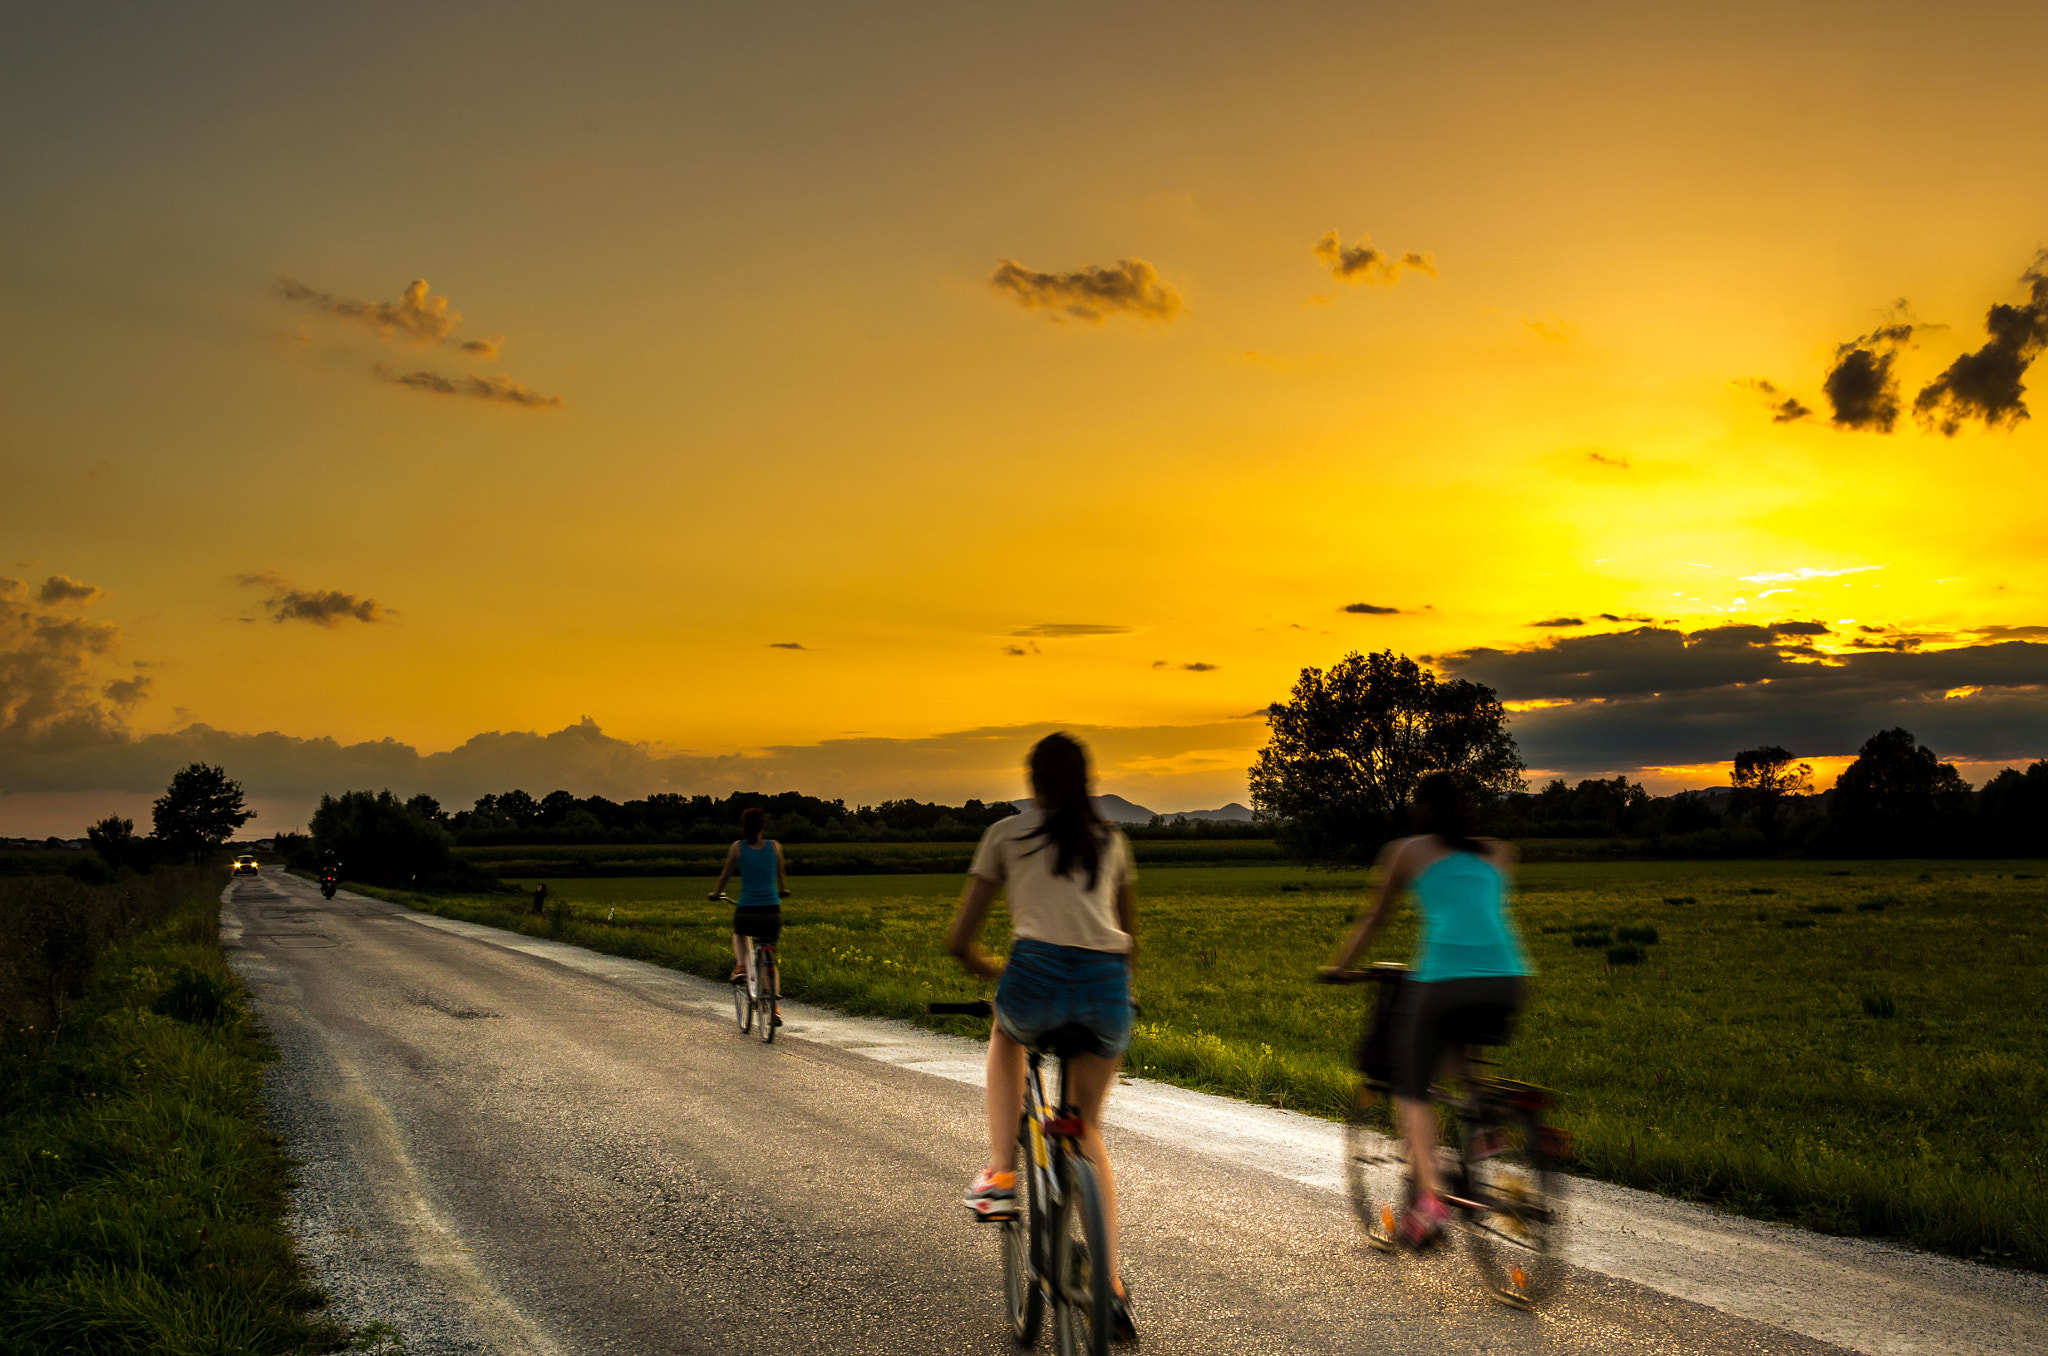 Pentax K-5 II sample photo. The cyclists on the road photography